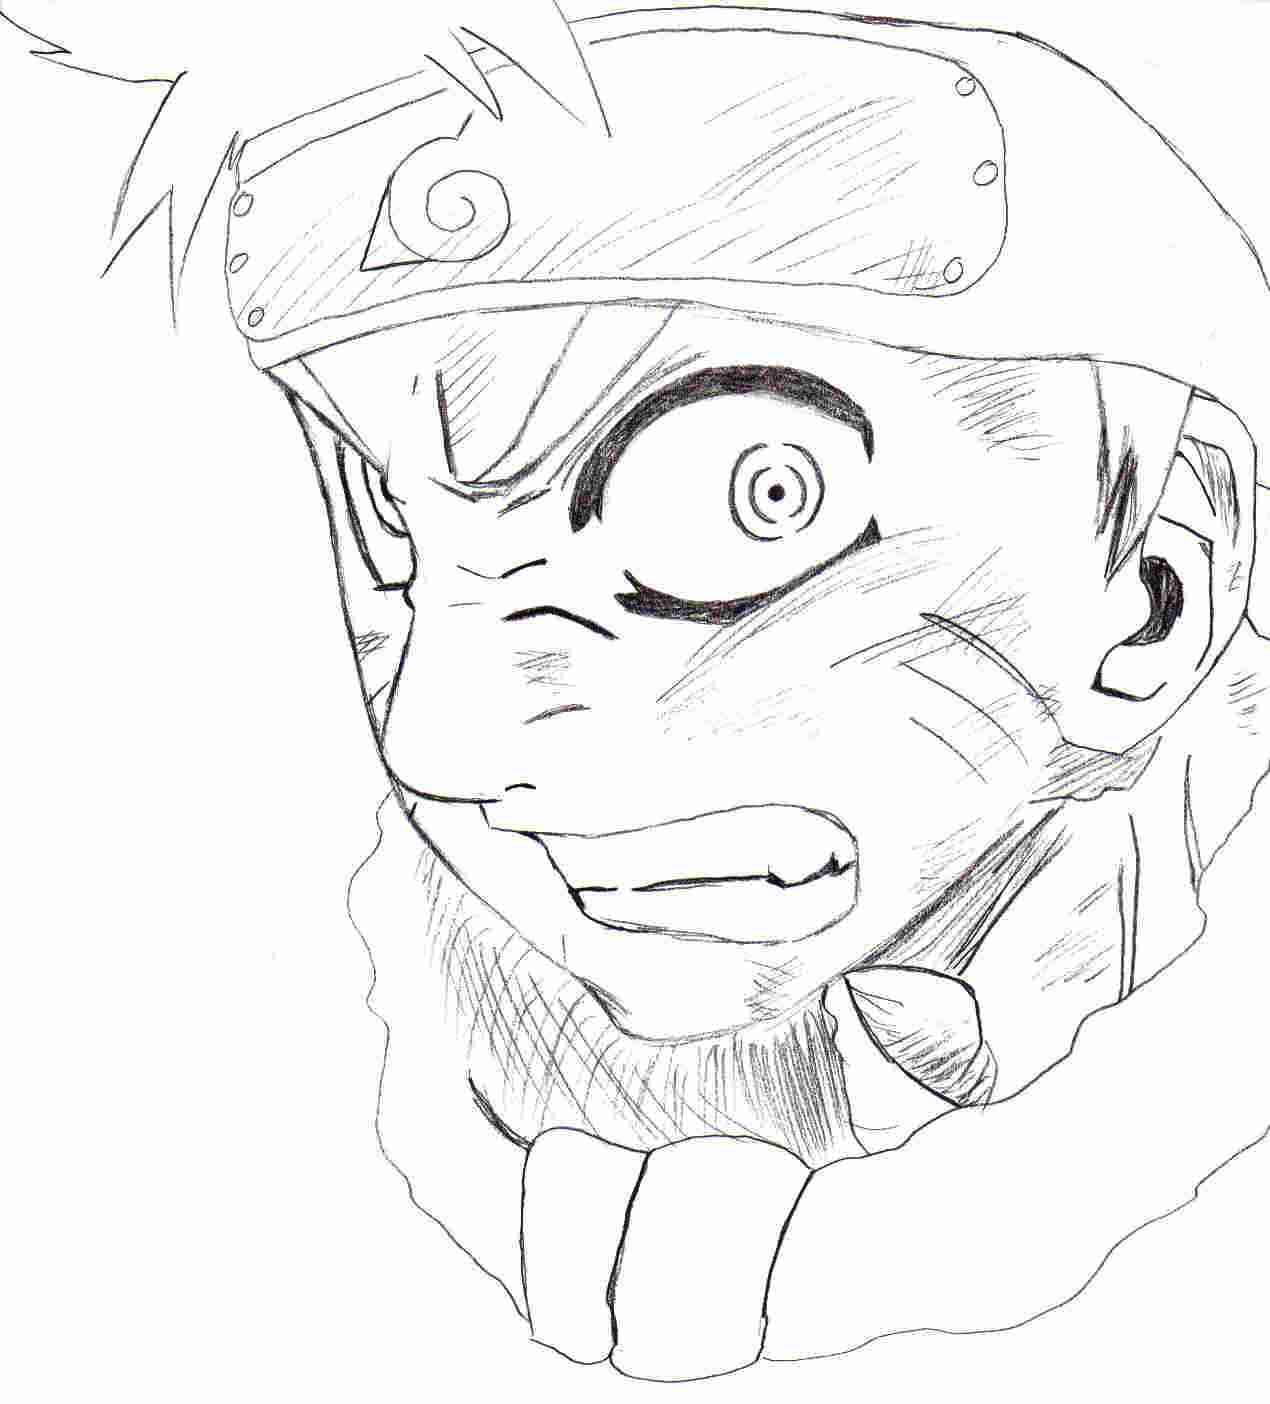 Angry Naruto Face by Mearicksart on DeviantArt